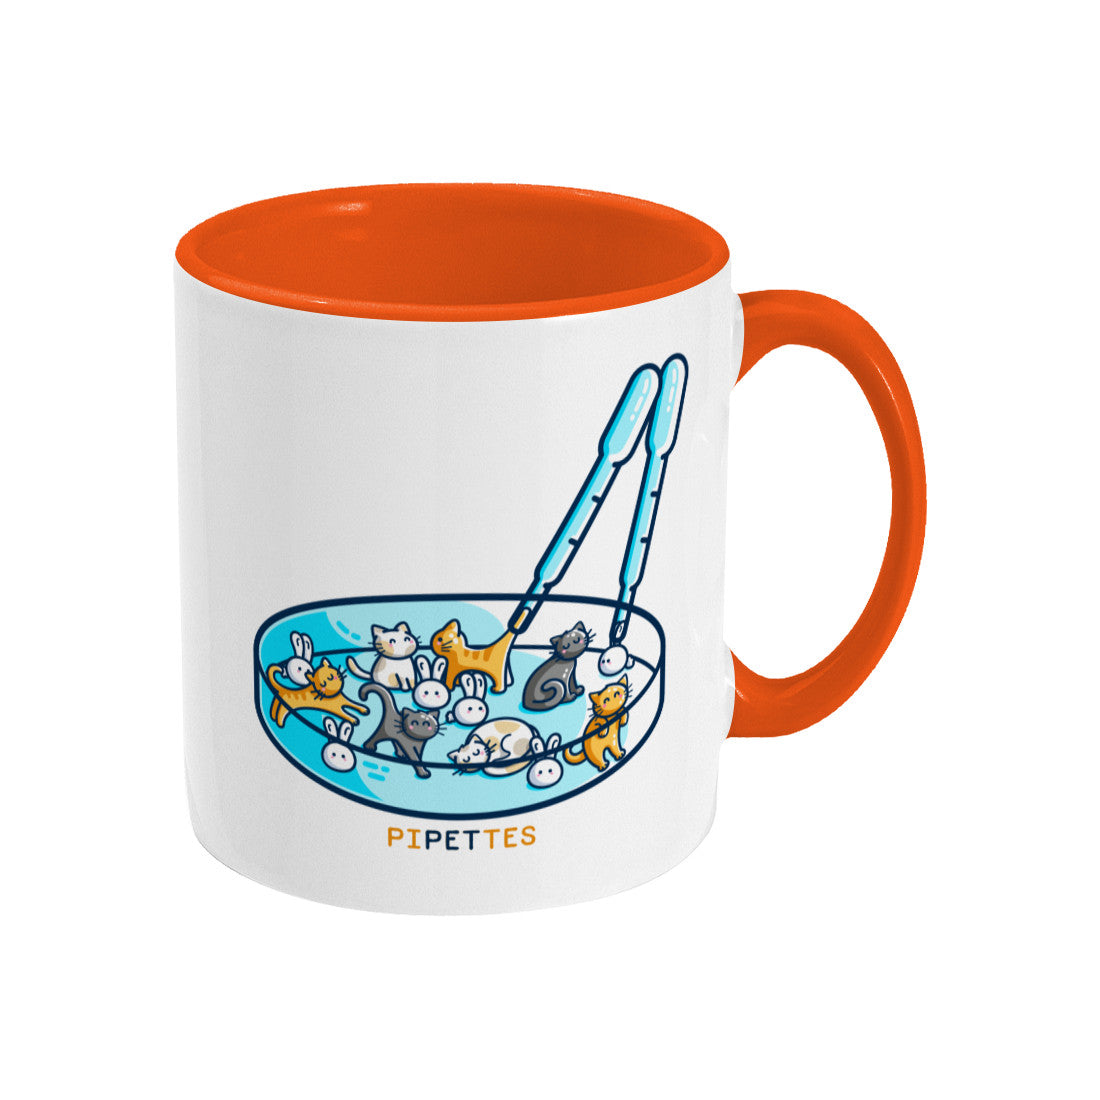 A white mug with an orange coloured handle and inside, handle pointing to the right. Design on the mug is a petri dish or cats and rabbits with two pipettes and the word pipettes beneath.